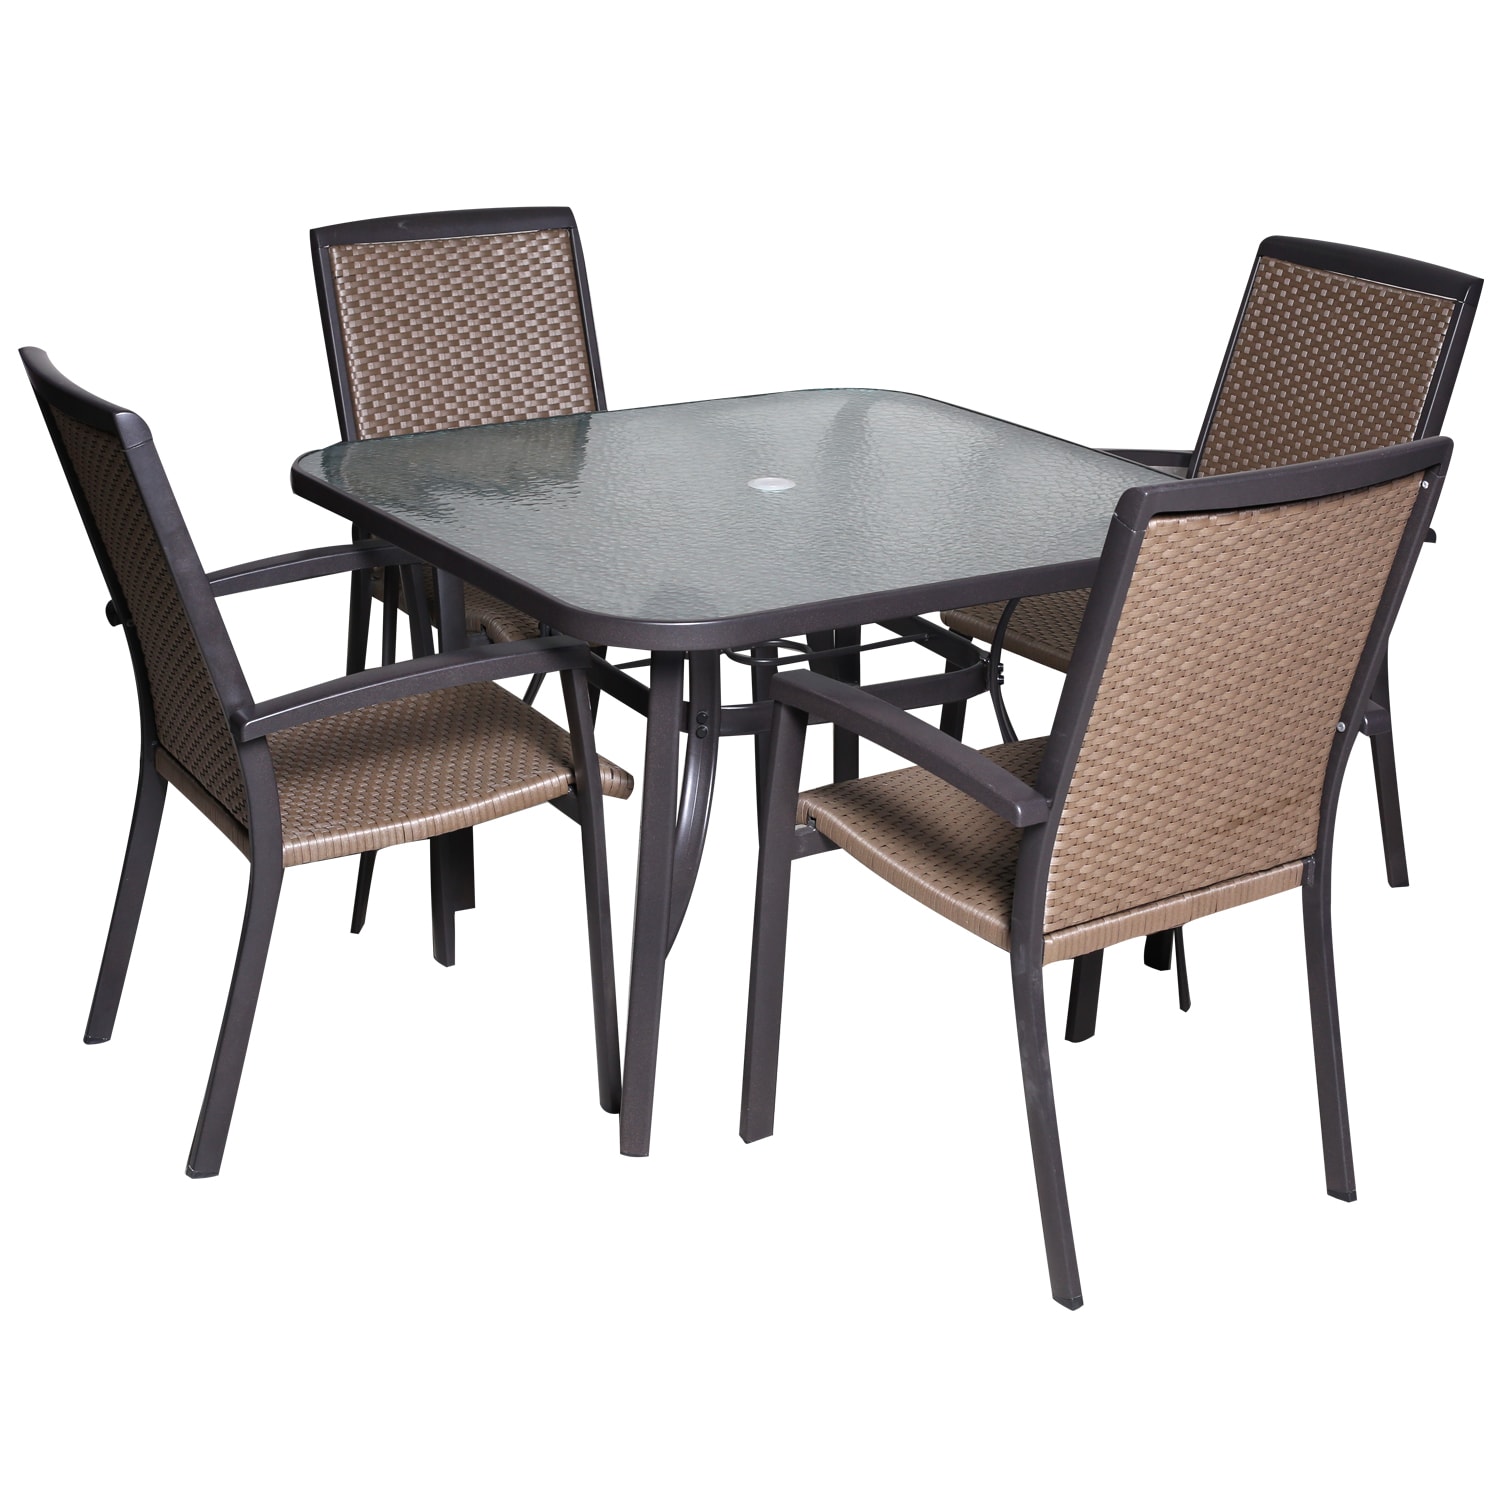 California Casual St. Charles Wine Wicker Dining Set Black Size 5 Piece Sets